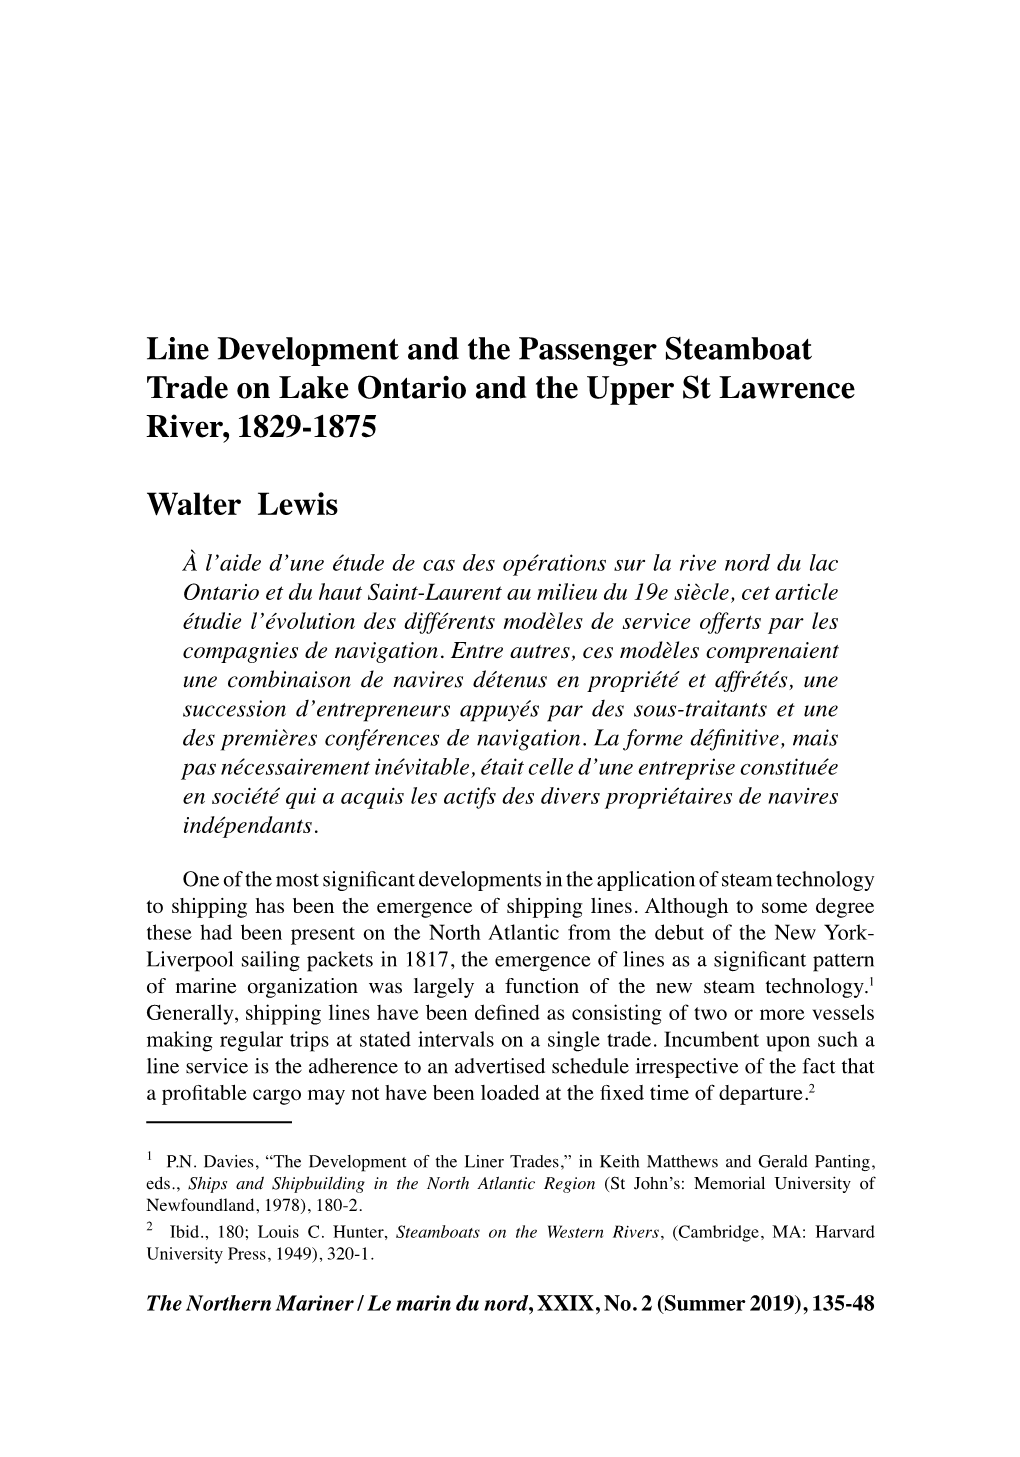 Line Development and the Passenger Steamboat Trade on Lake Ontario and the Upper St Lawrence River, 1829-1875